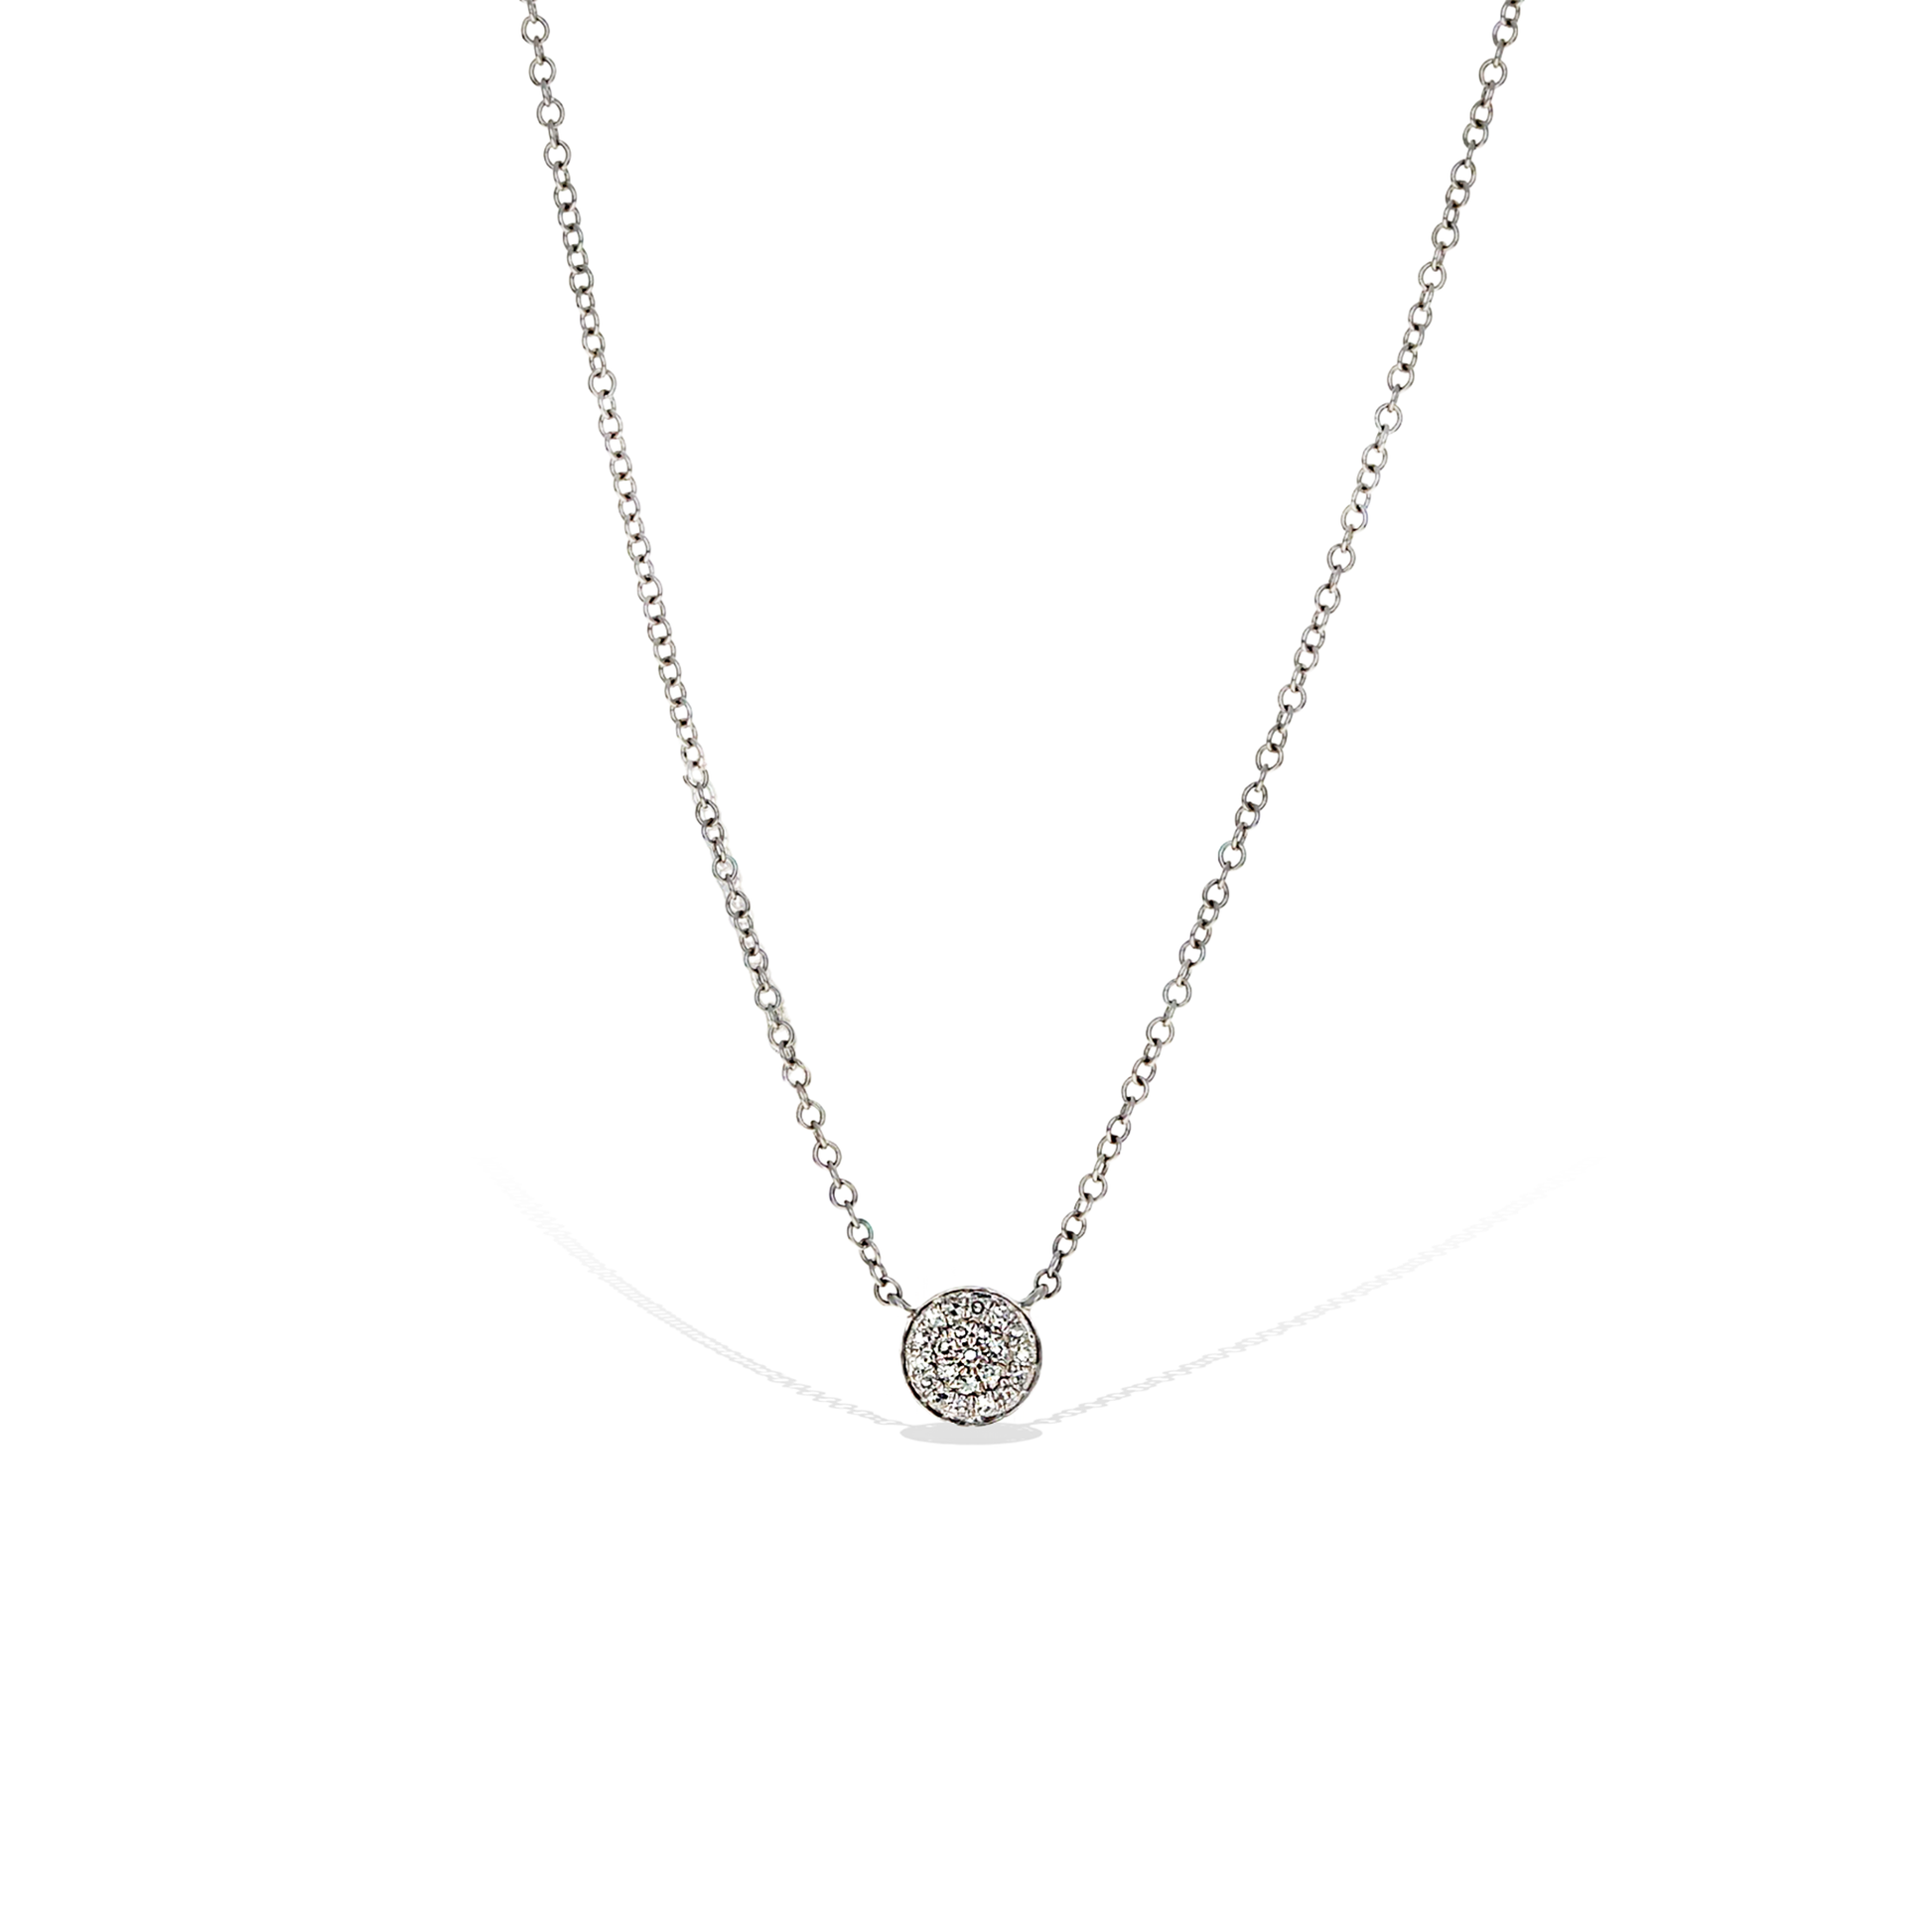 Alexandra Marks Jewelry | Petite Pave' Diamond Disc Necklace in 14kt White Gold